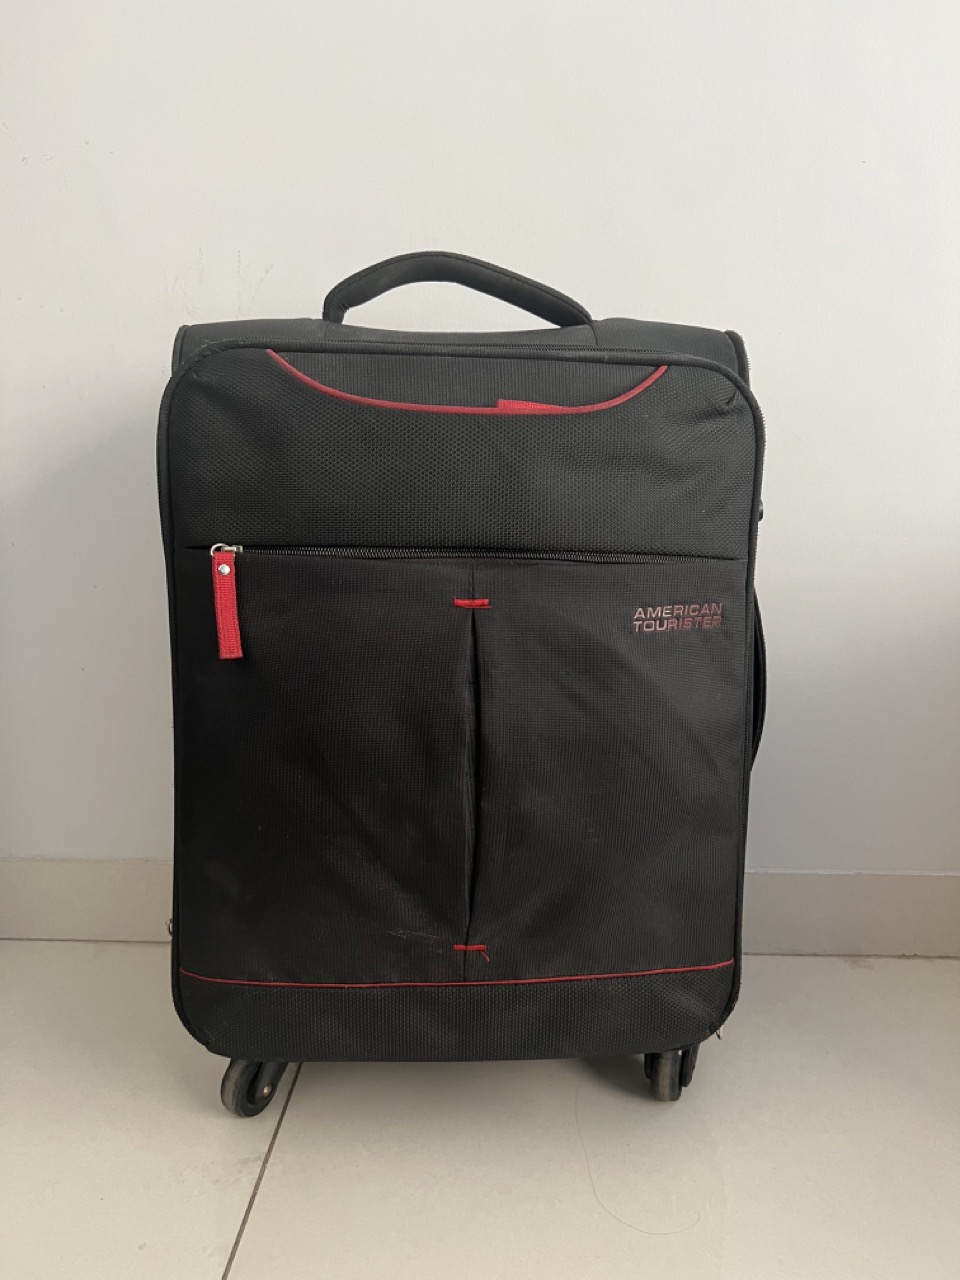 Soft shell suitcase for backpack vs suitcase